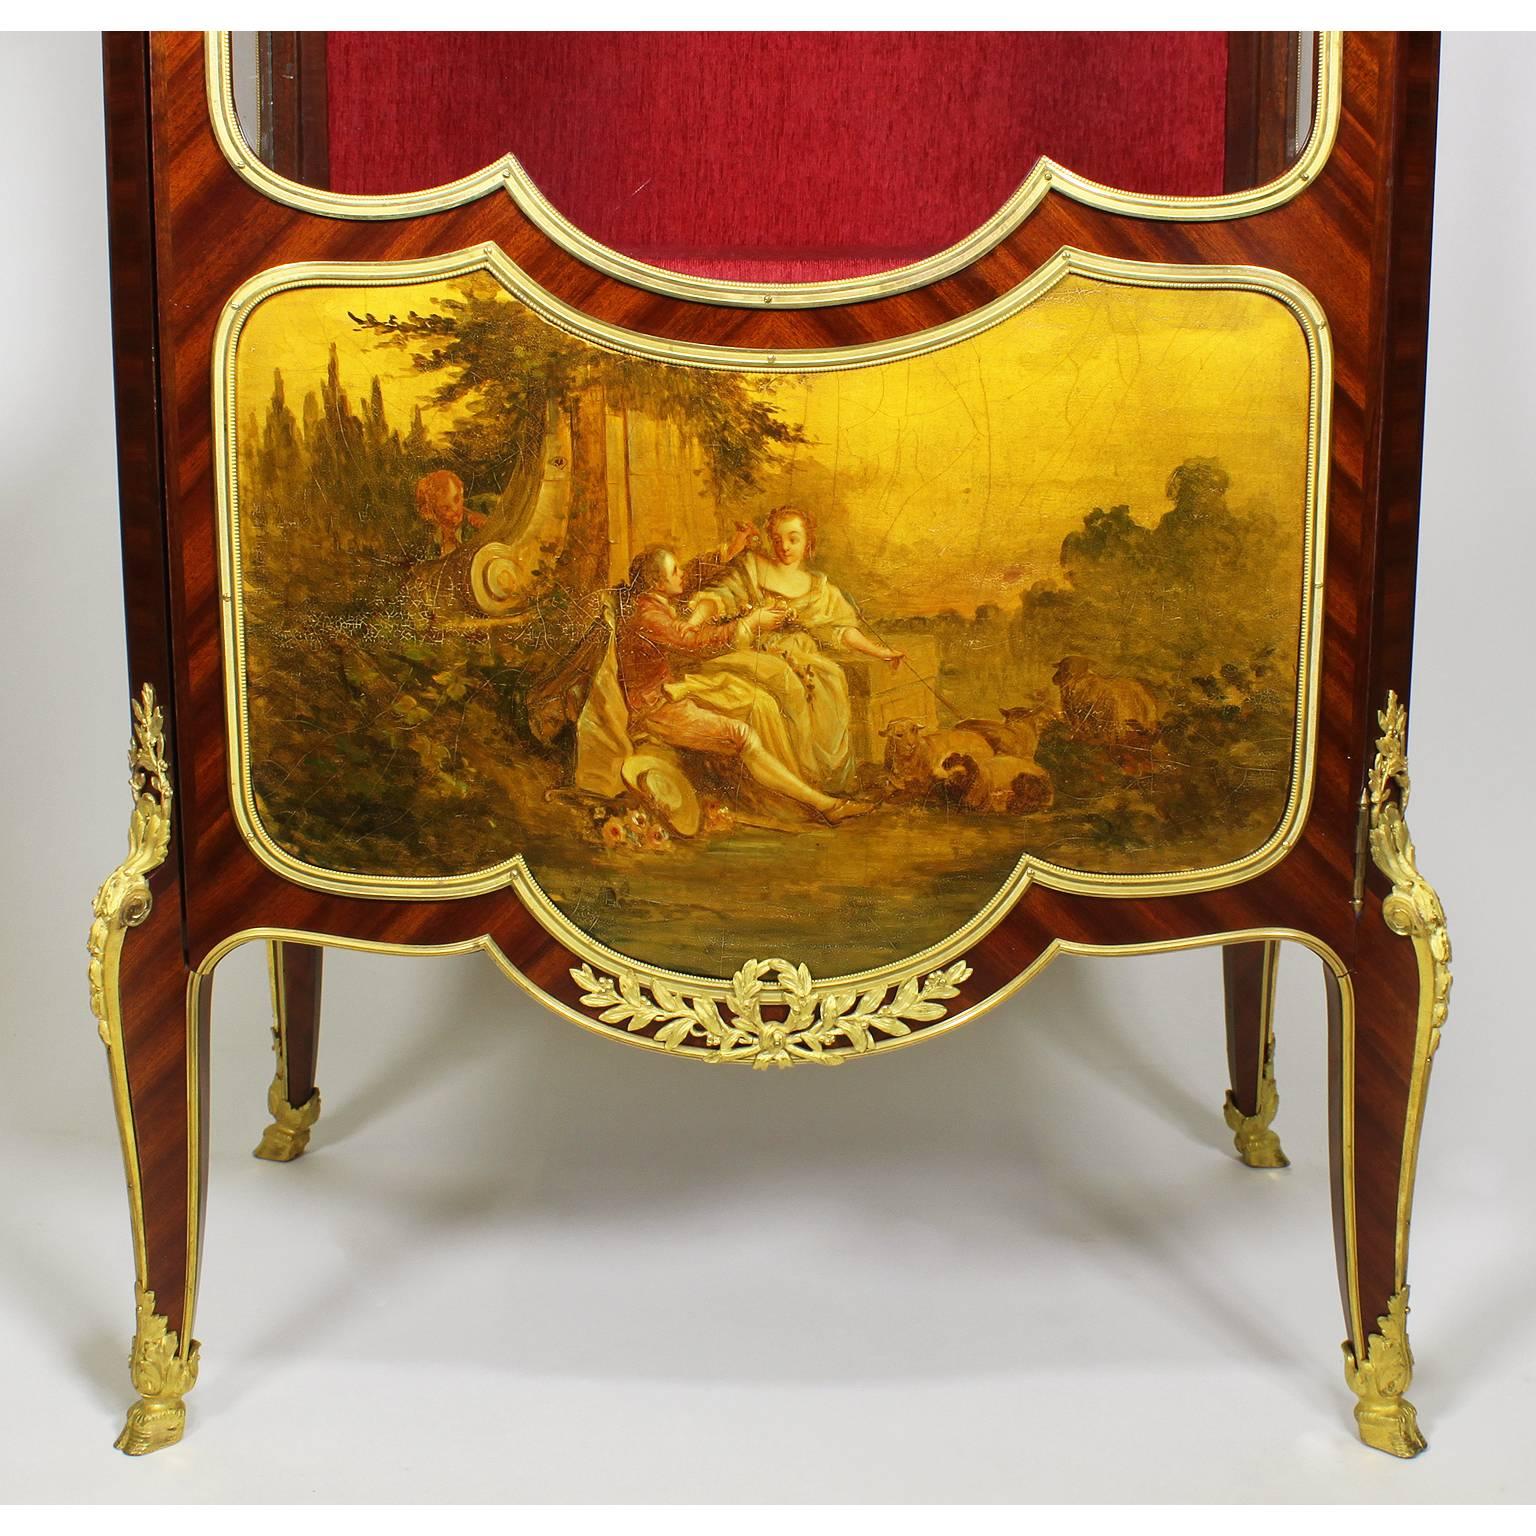 Early 20th Century Fine French Belle Epoque 19th Century Vernis Martin Vitrine by Louis Majorelle For Sale